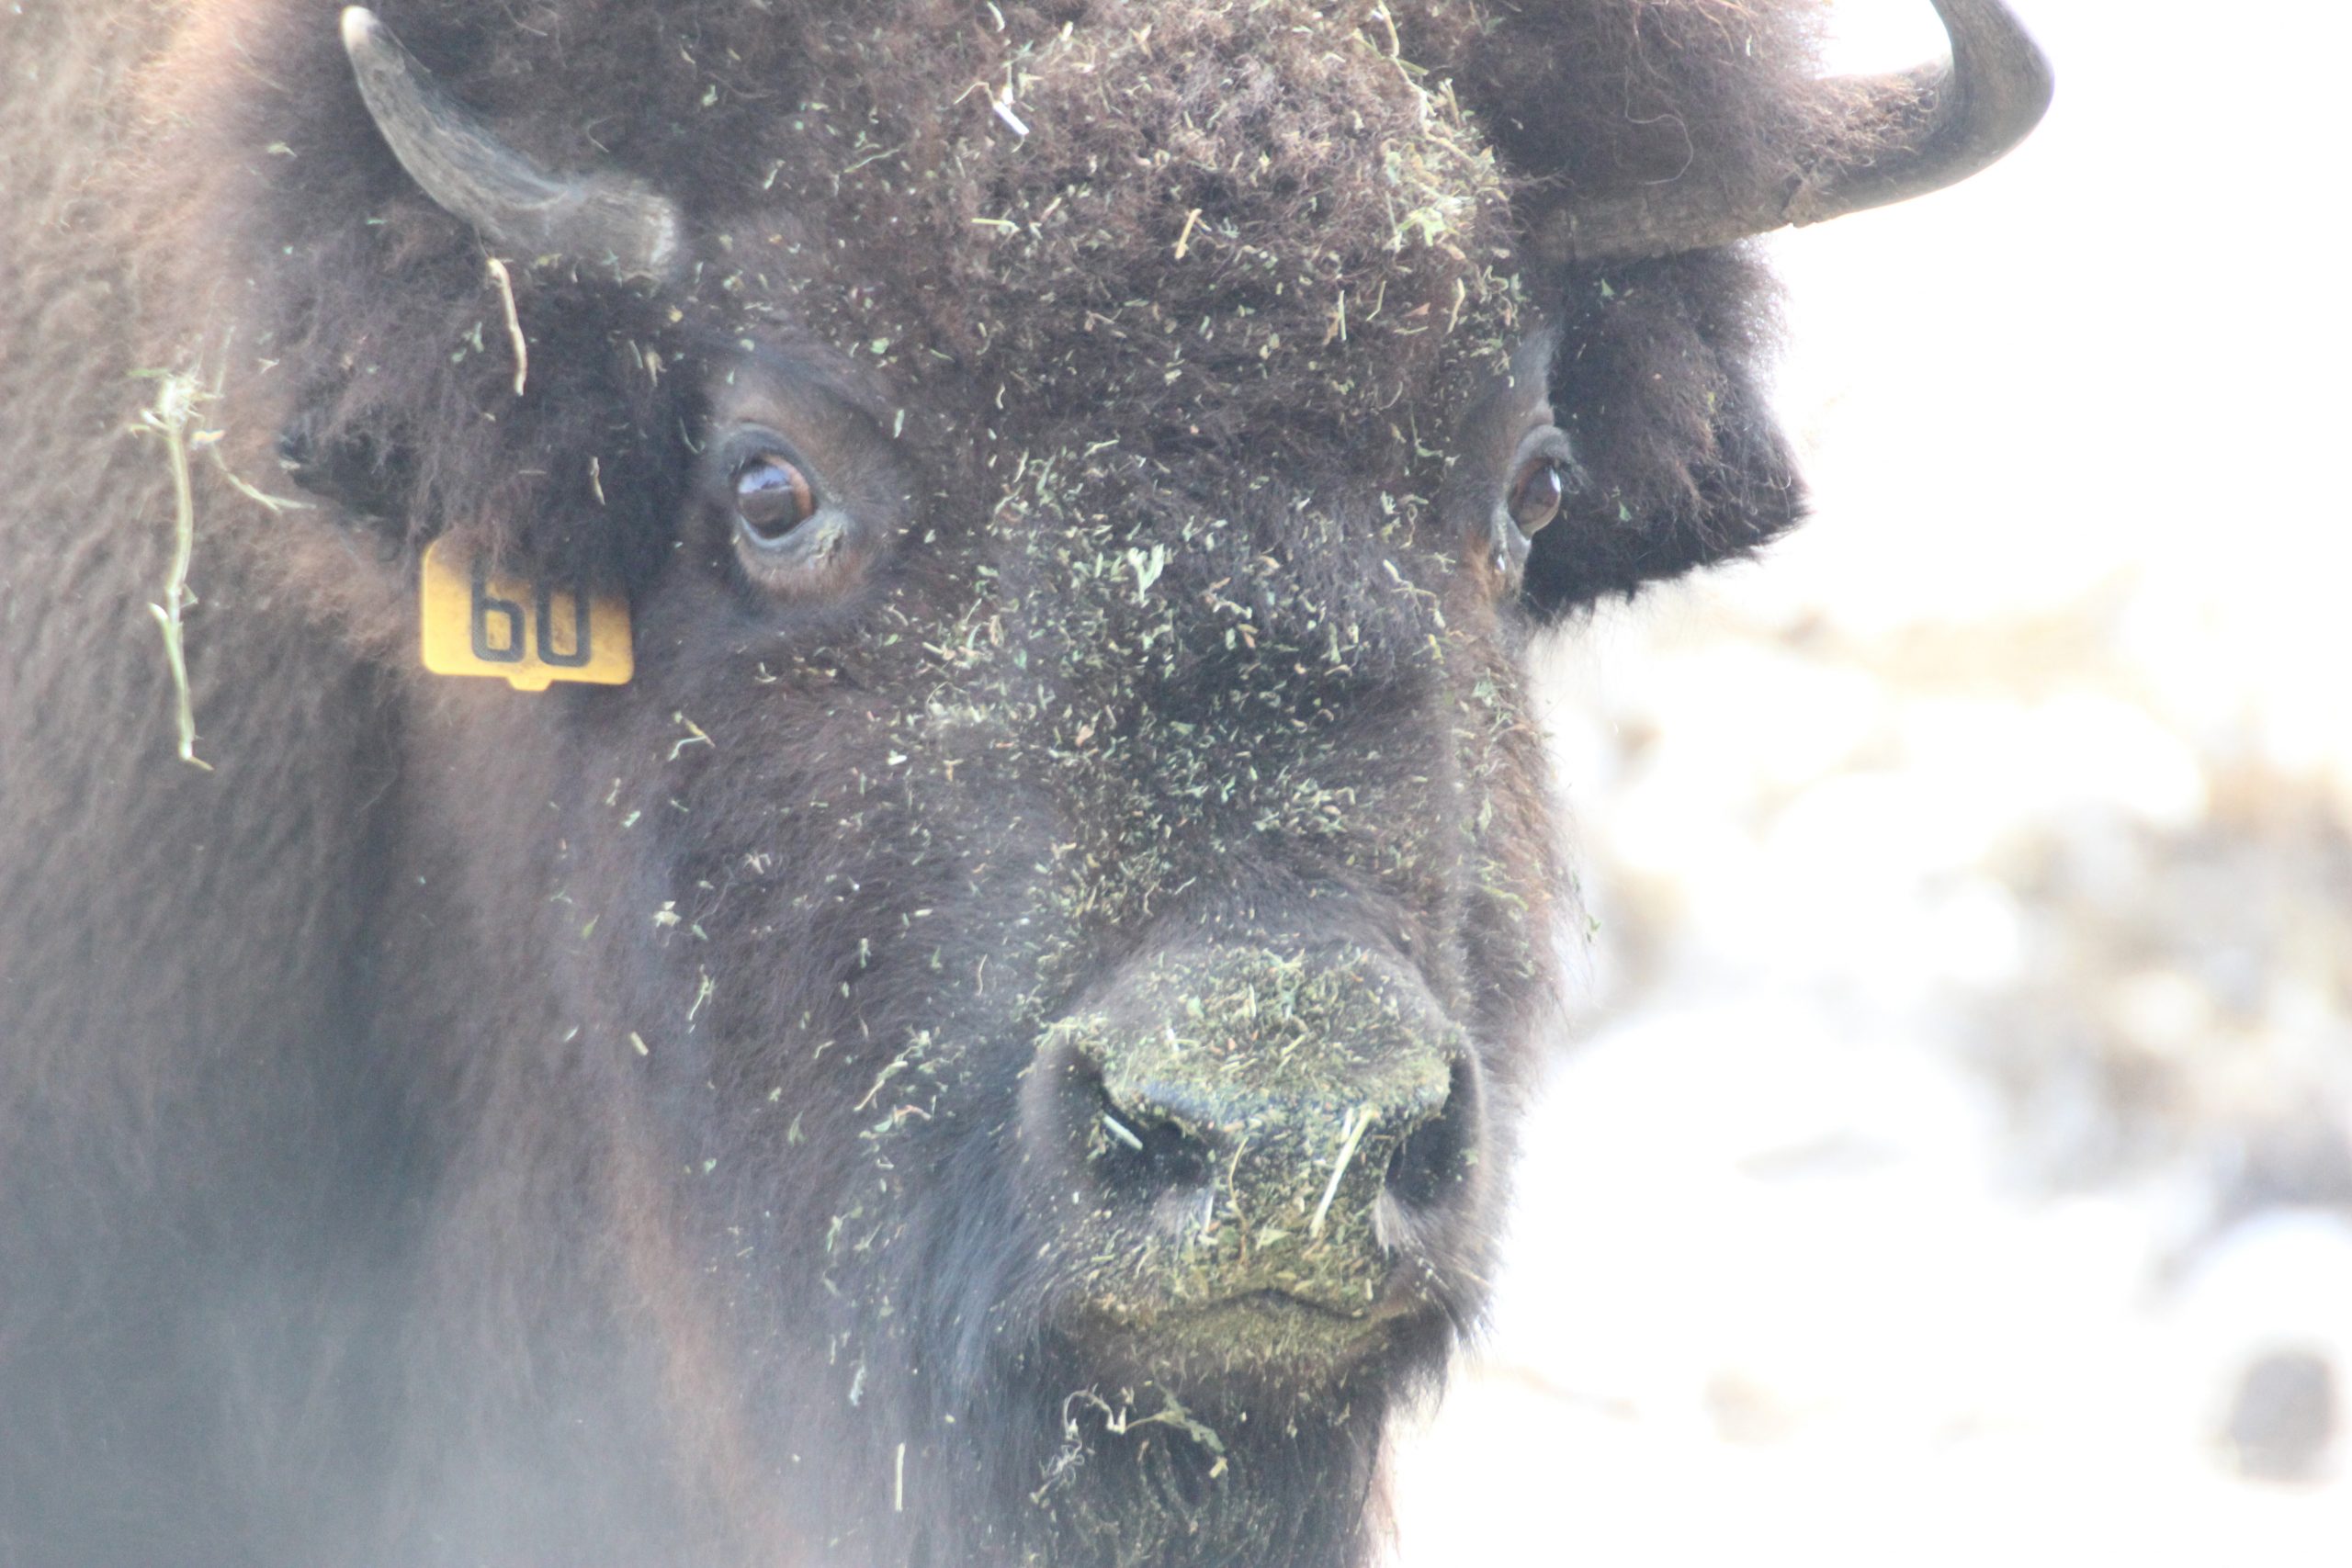 A tagged bison